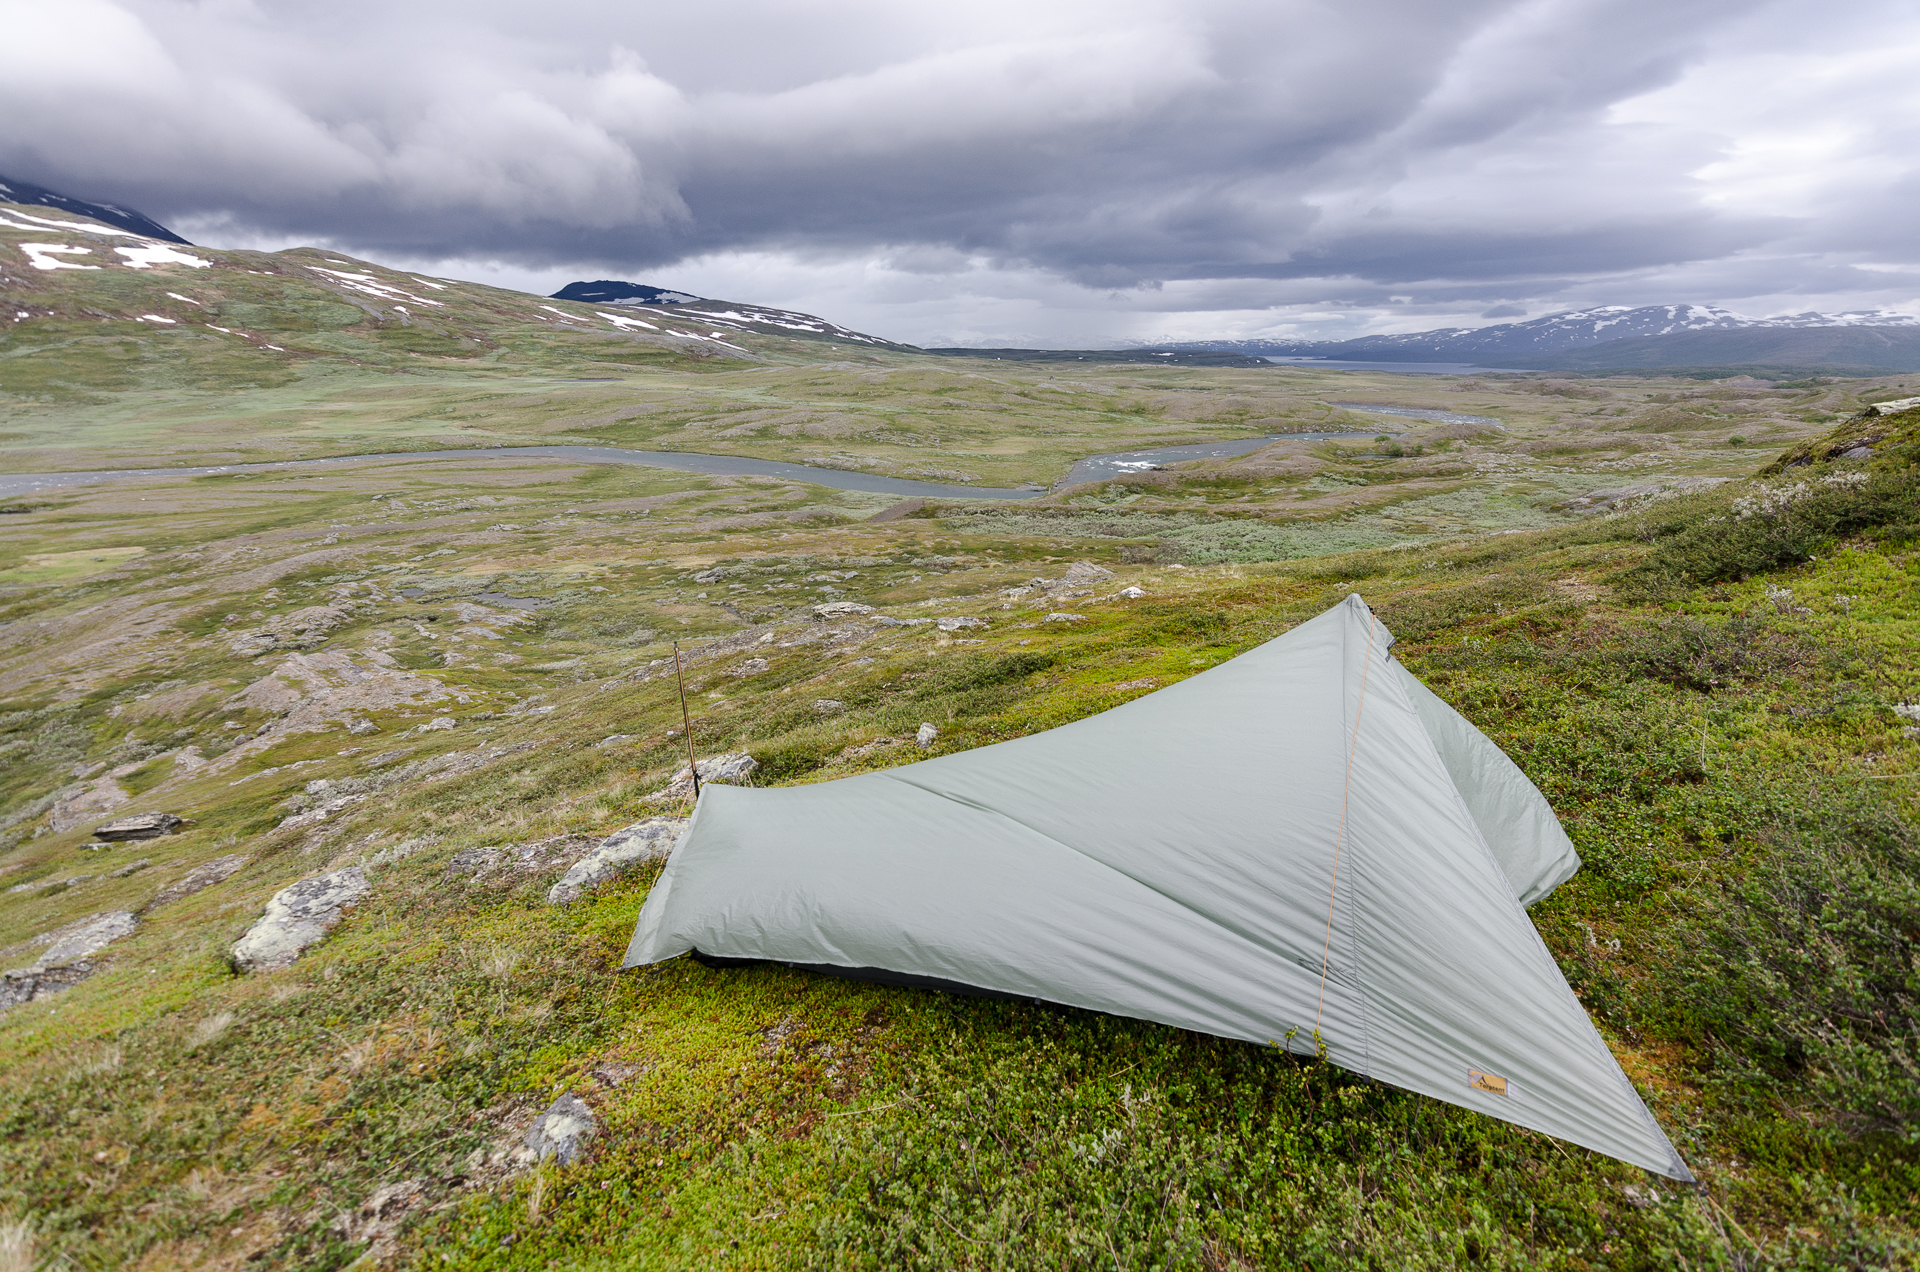 The wind started in the middle of the night, and my tent was not well oriented. At 6am, I was already up. At least, the view was great, but I didn’t even take a breakfast and left as fast as I could. Brrr.